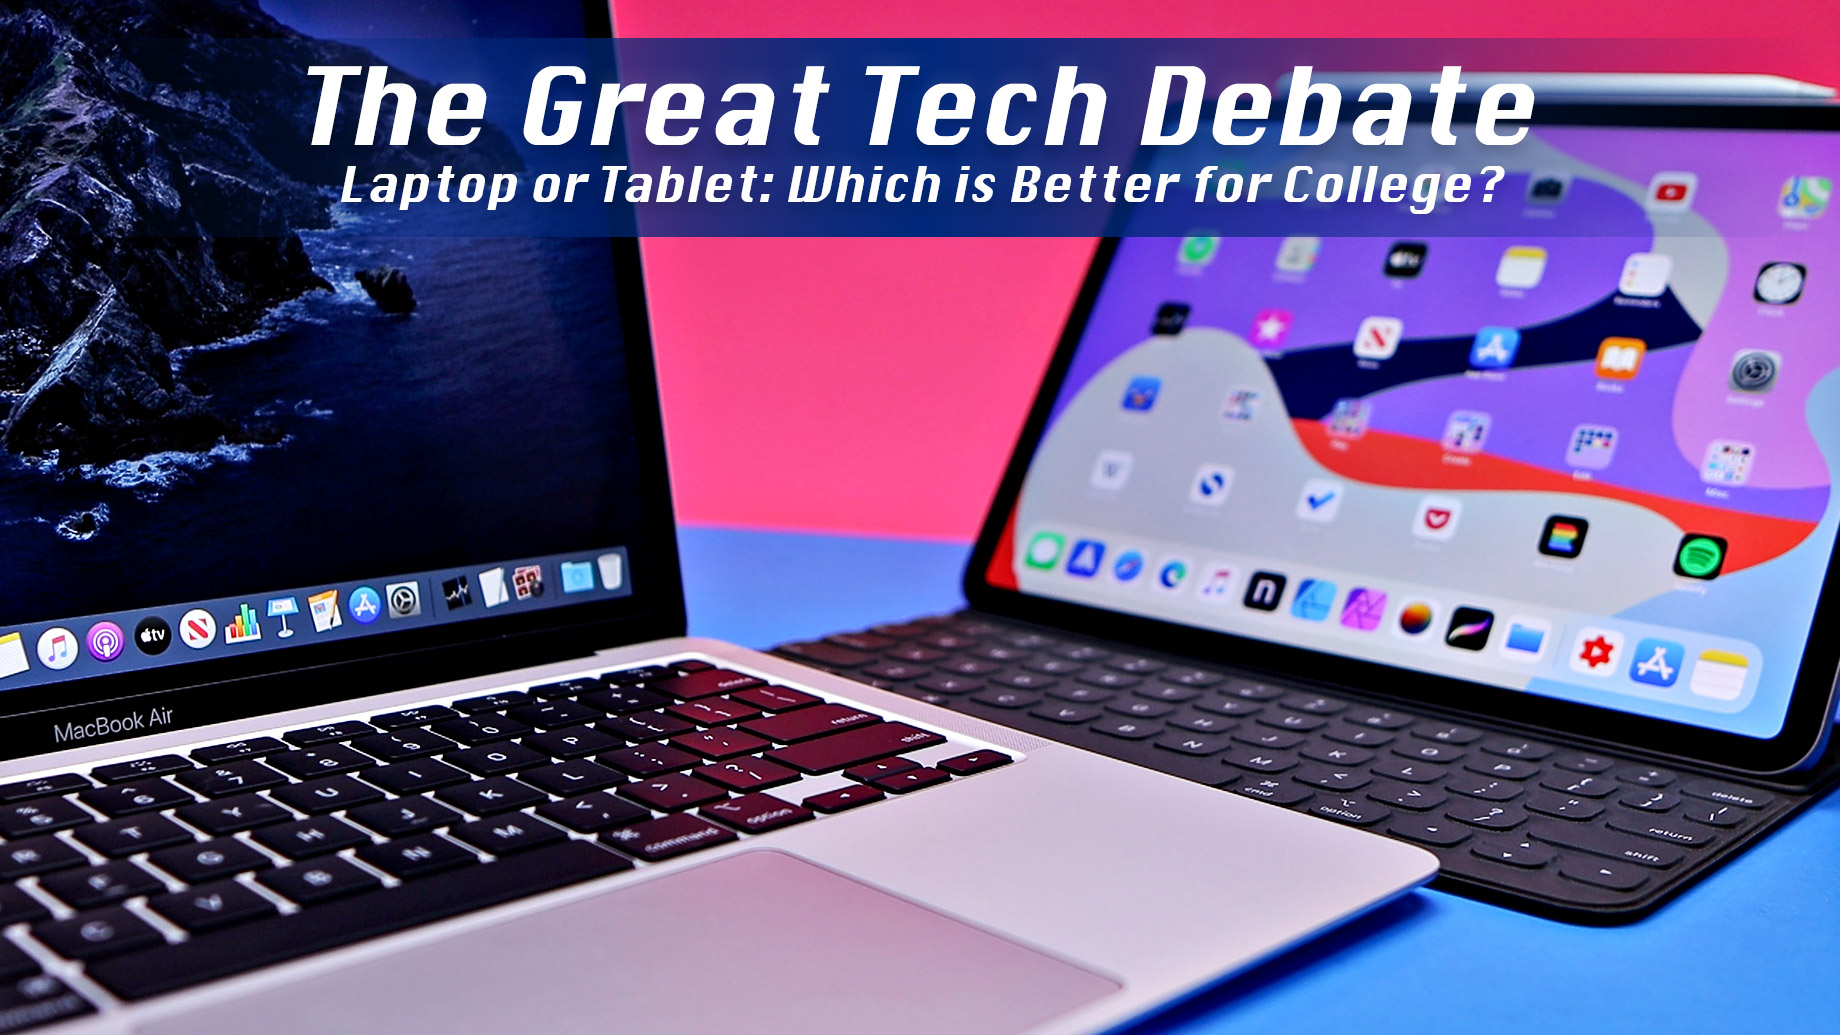 The Great Tech Debate – Laptop or Tablet: Which is Better for College?